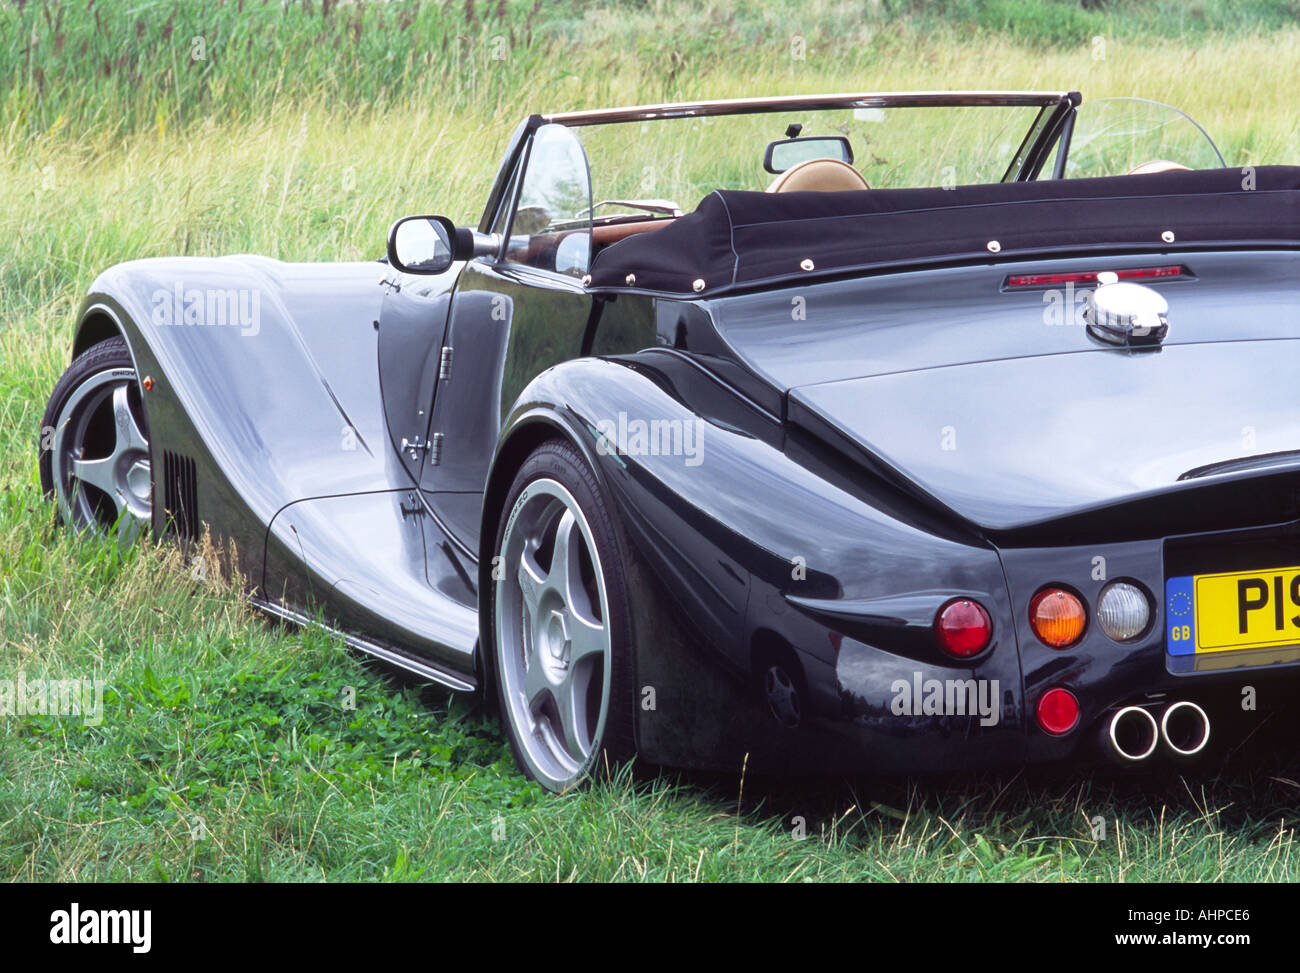 Black Morgan Aero 8 Parked on Grass by Reed Bed Stock Photo